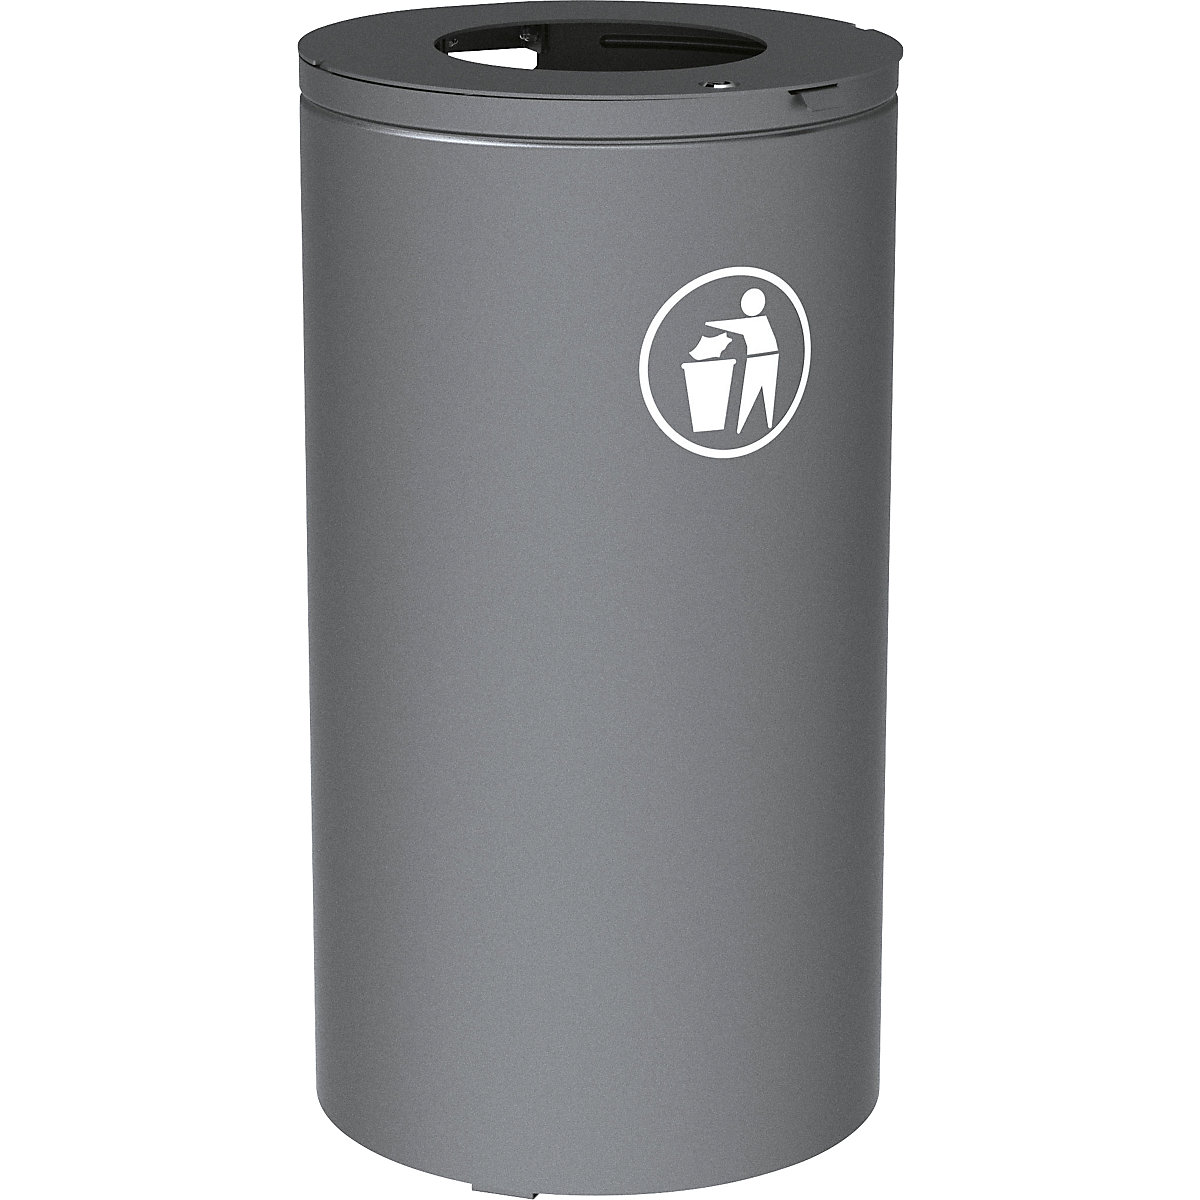 OLBIA outdoor waste collector – PROCITY, capacity 80 l, with inner container, grey-2